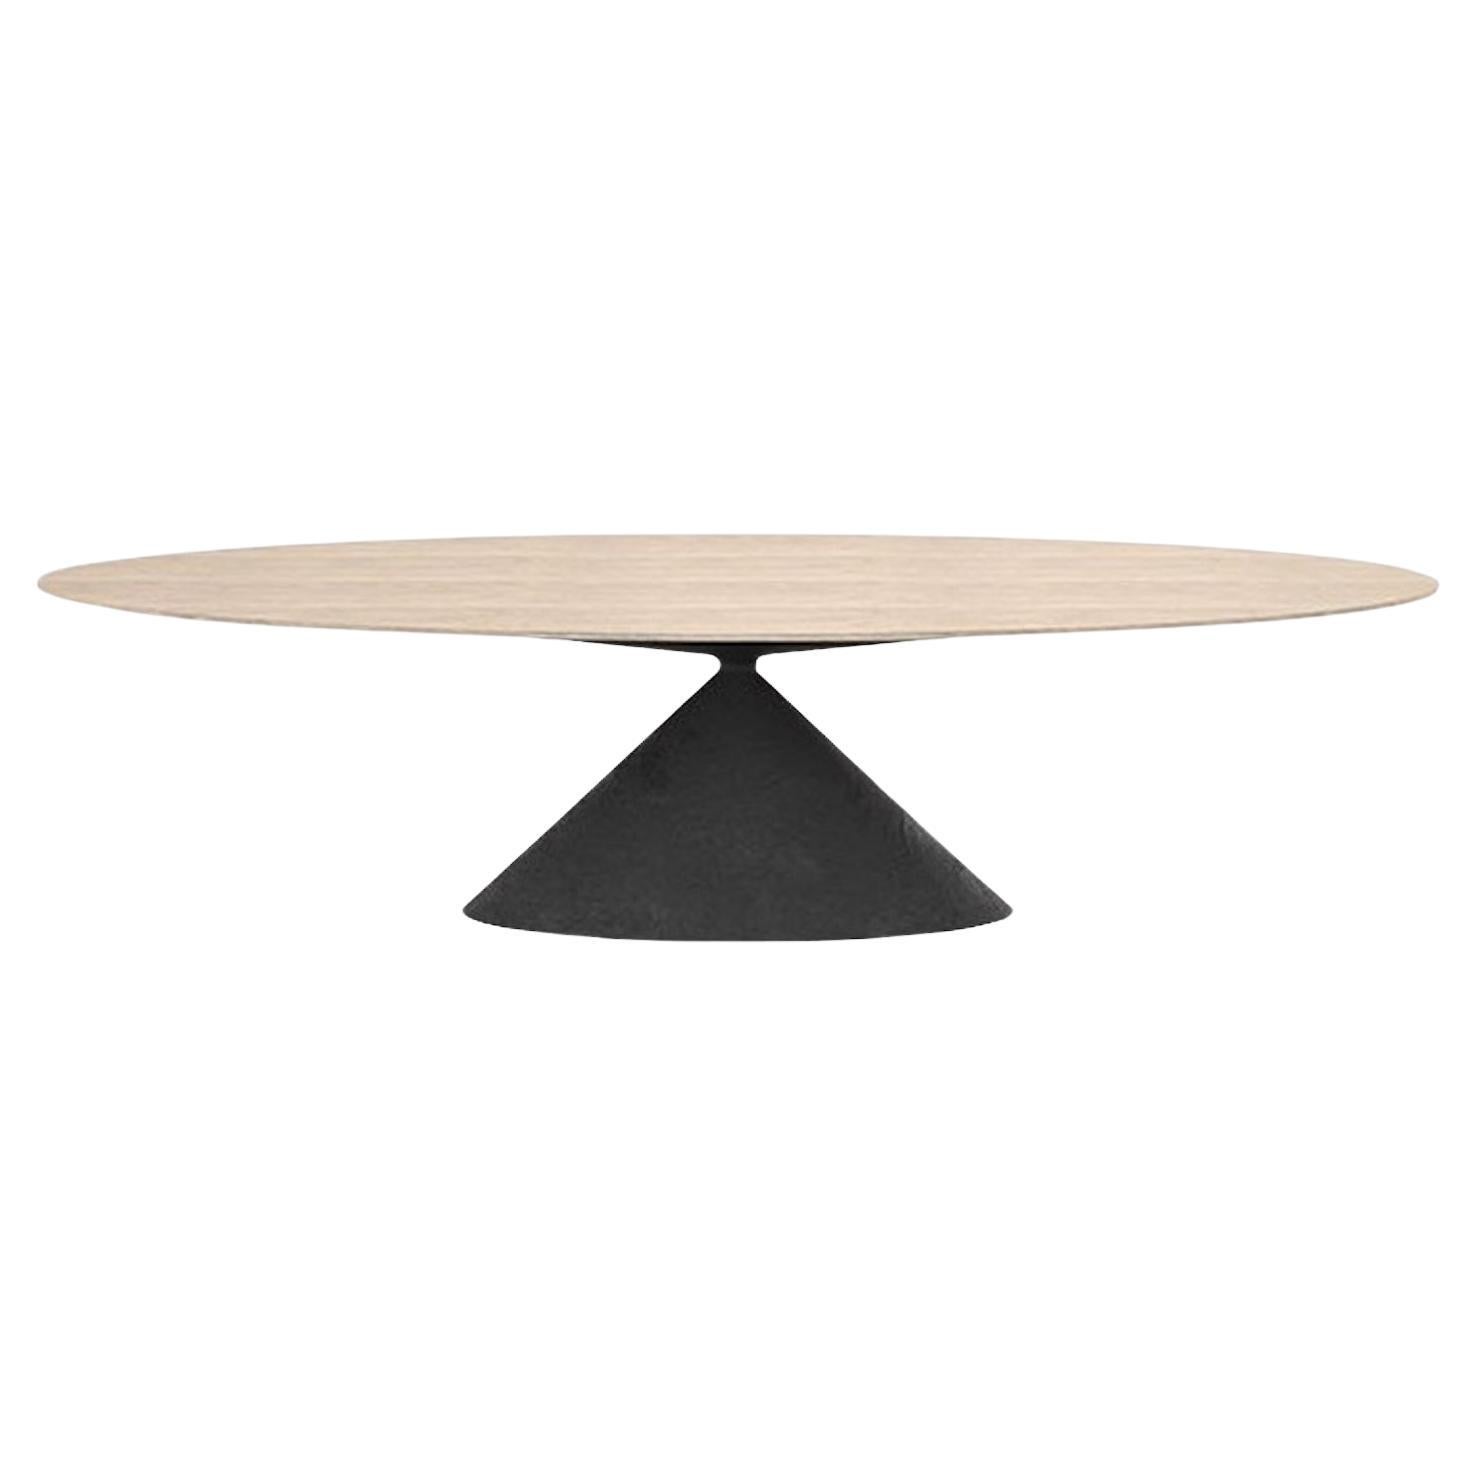 Customizable Desalto Maxi Clay Table with Ash Top by Marc Krusin For Sale